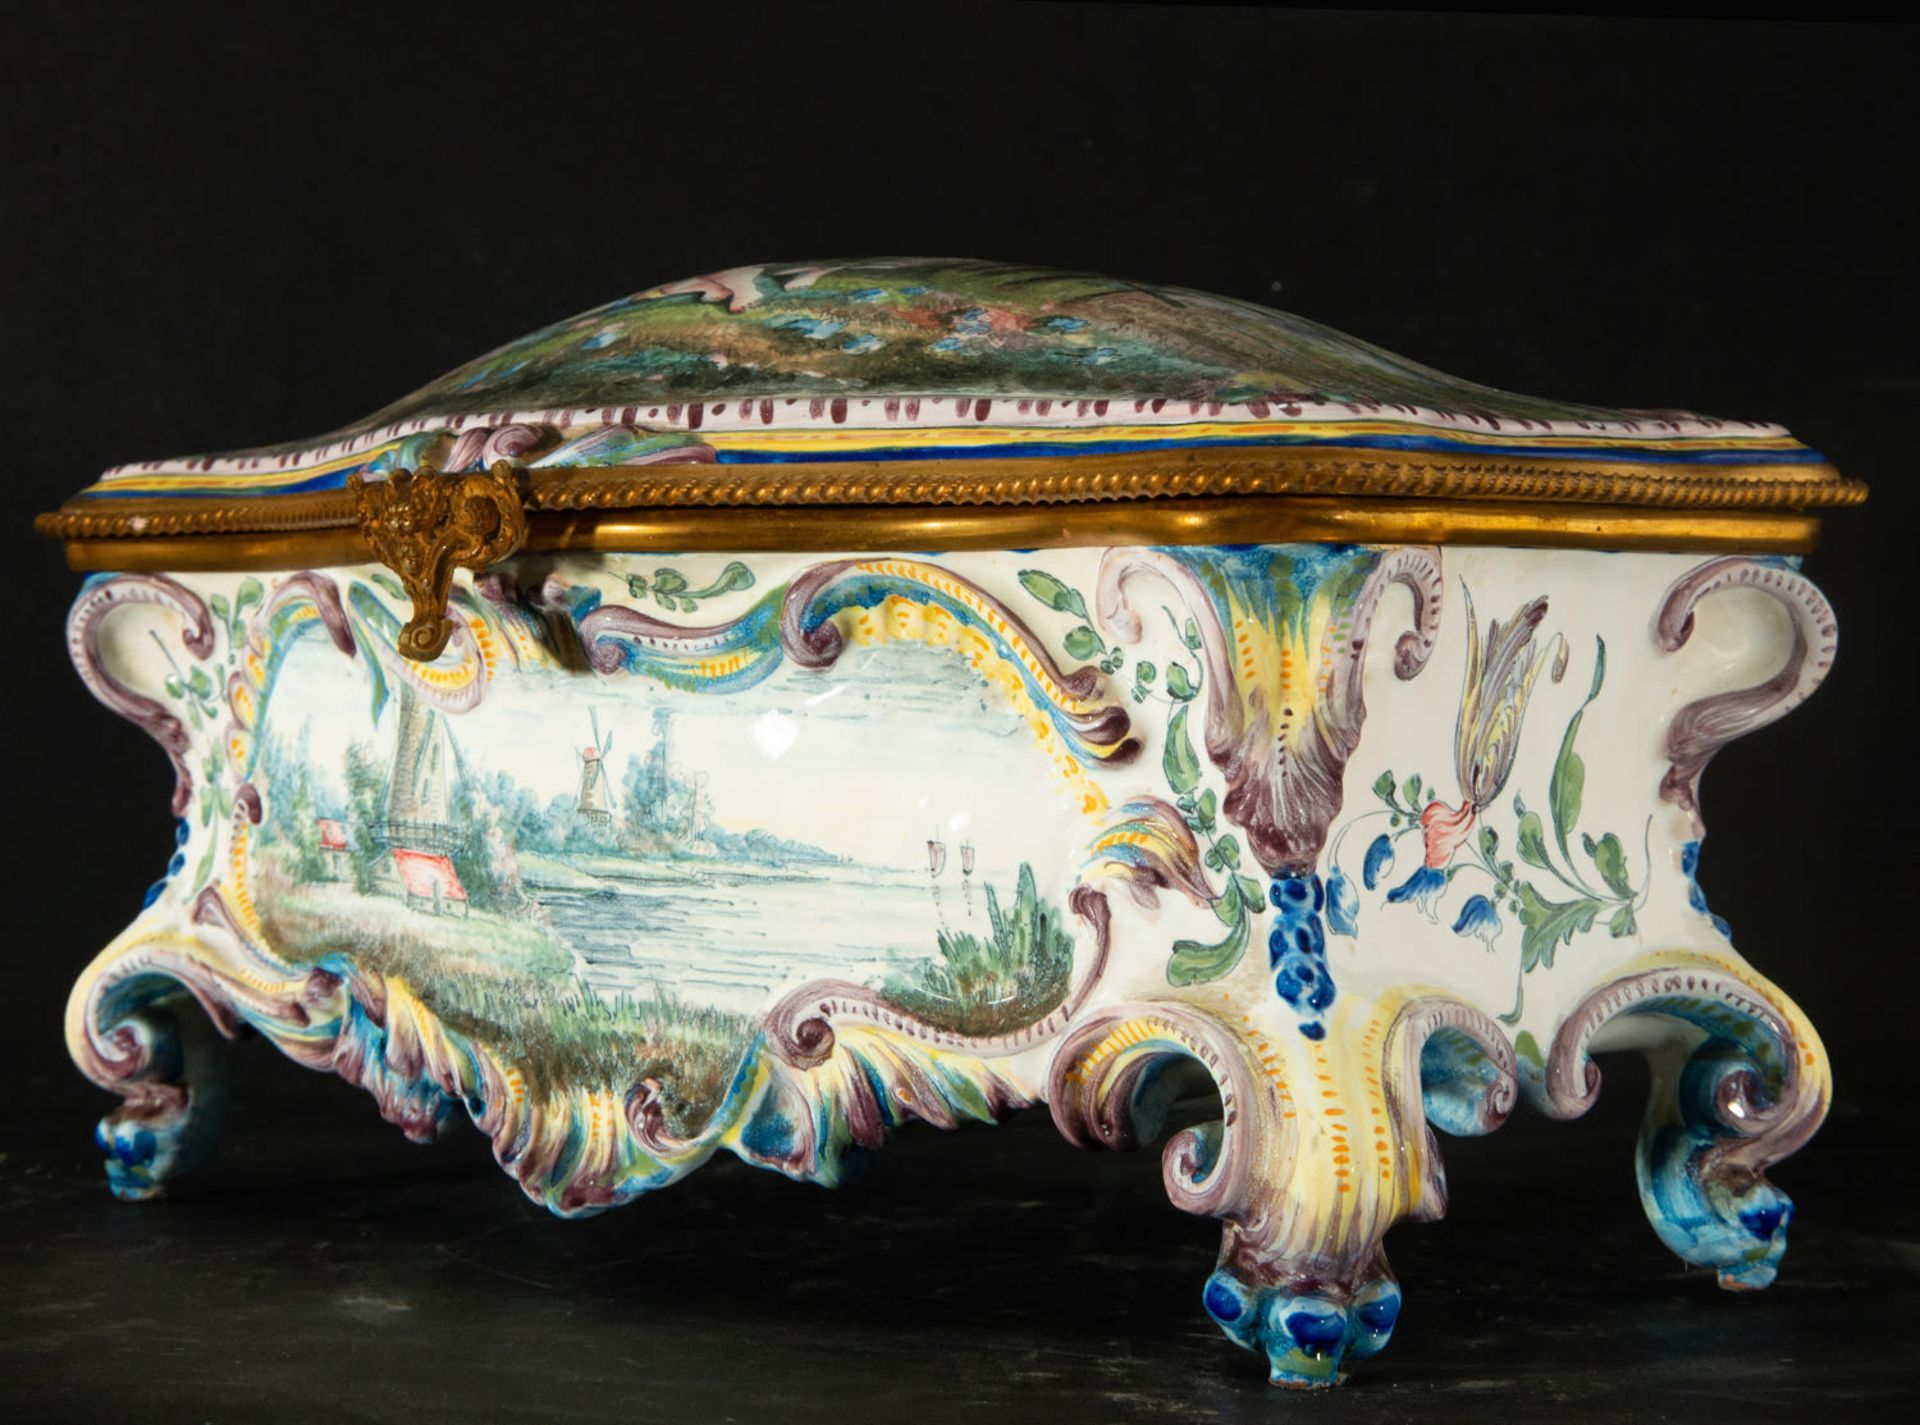 Magnificent Marseille porcelain jewelry box with gallant scene, 19th century - Image 3 of 7